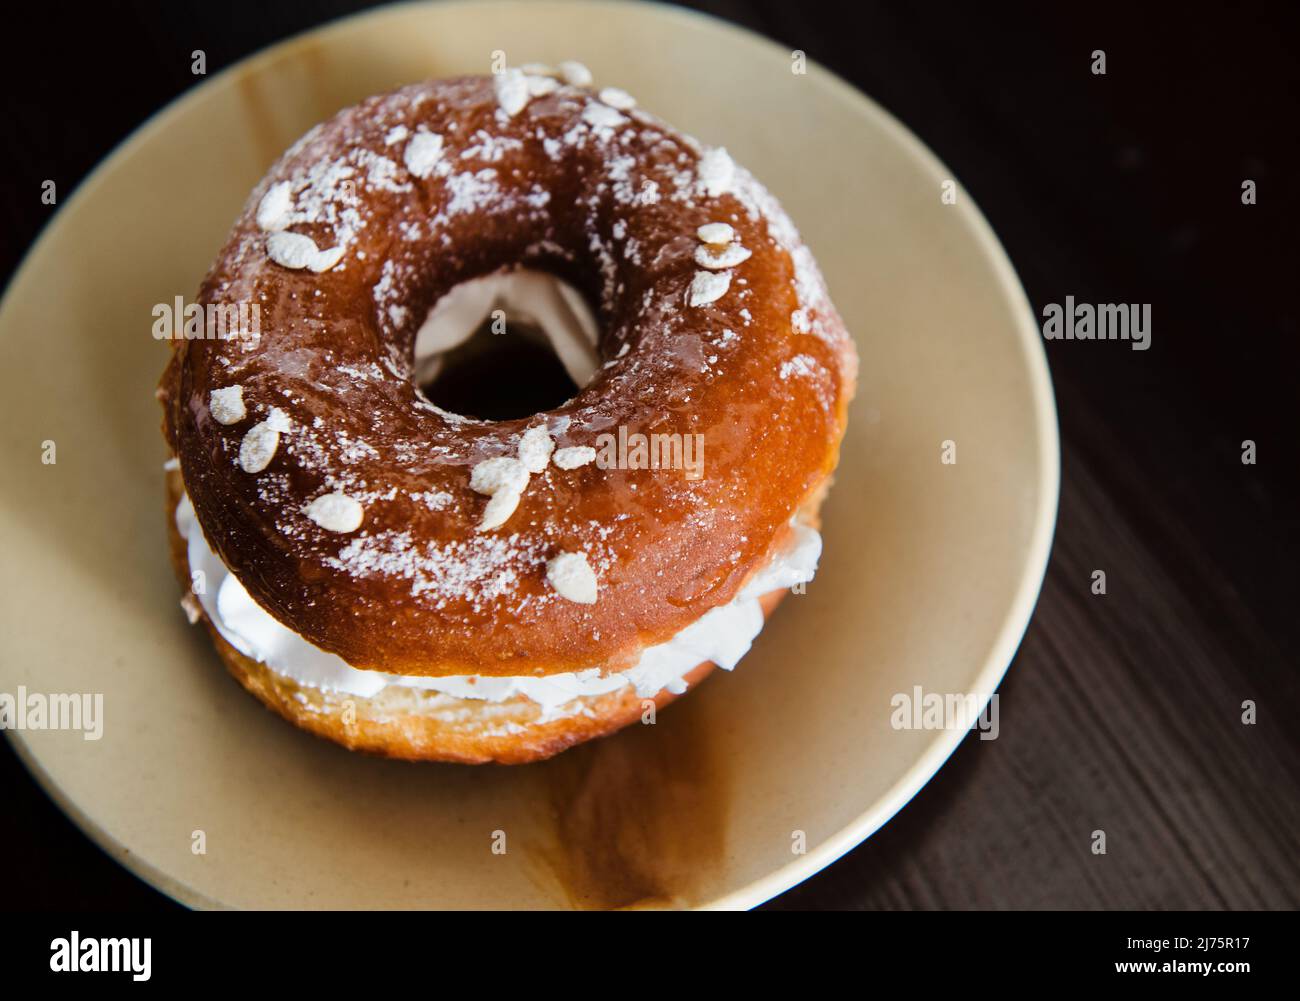 Glazed donut with whipped cream and powdered sugar Stock Photo